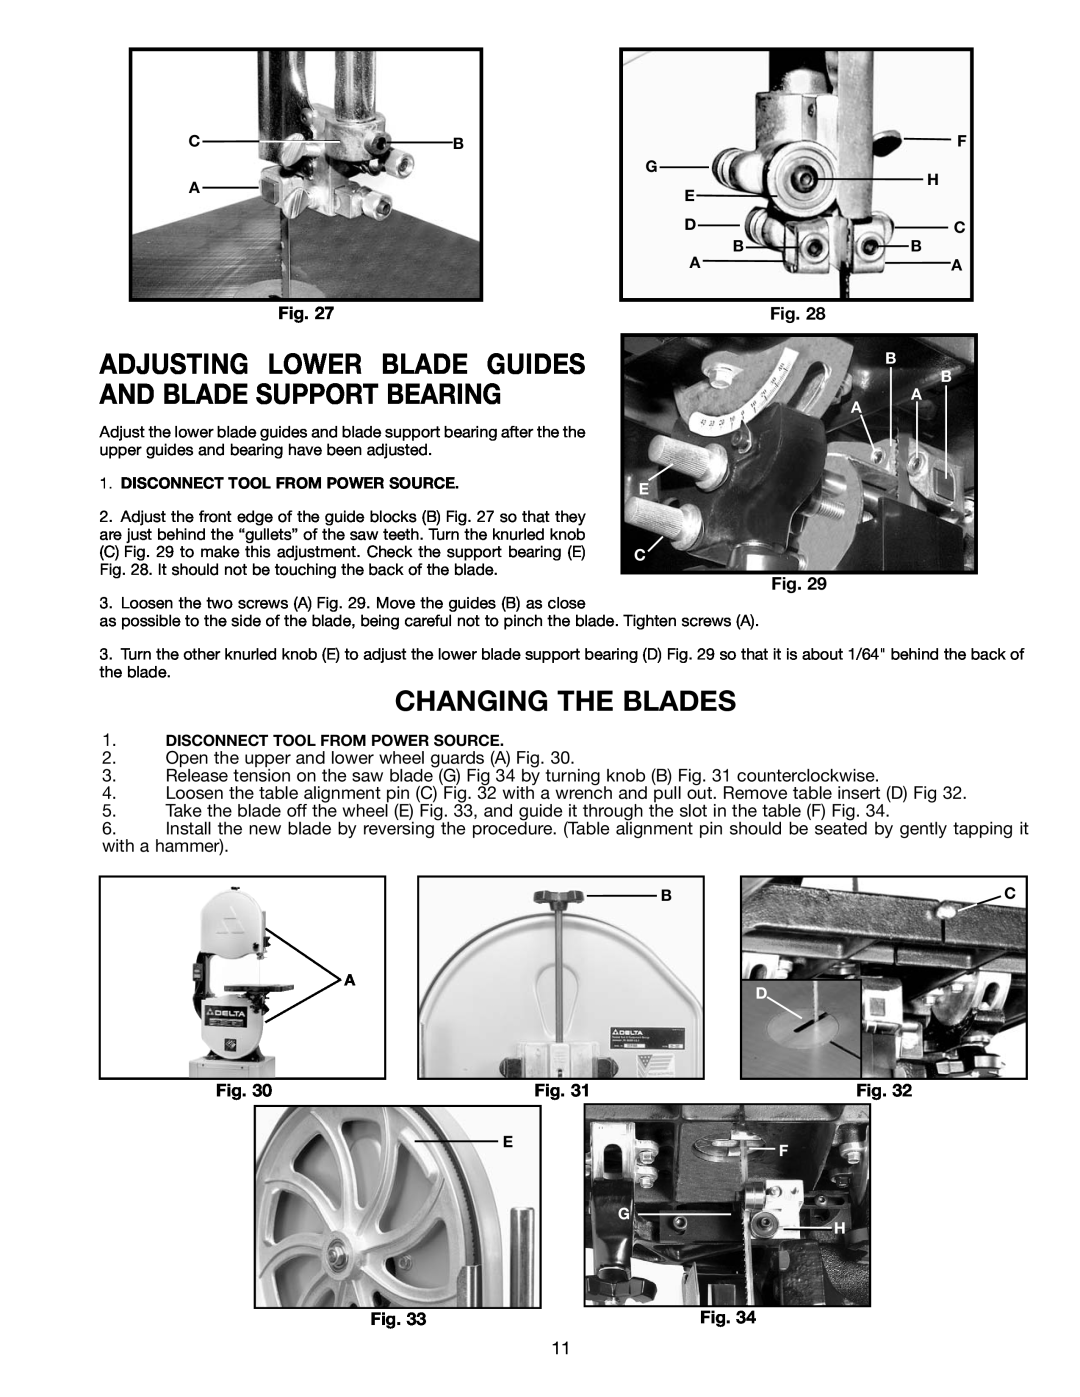 Delta 28-241, 28-299A instruction manual Adjusting Lower Blade Guides And Blade Support Bearing, Changing The Blades 